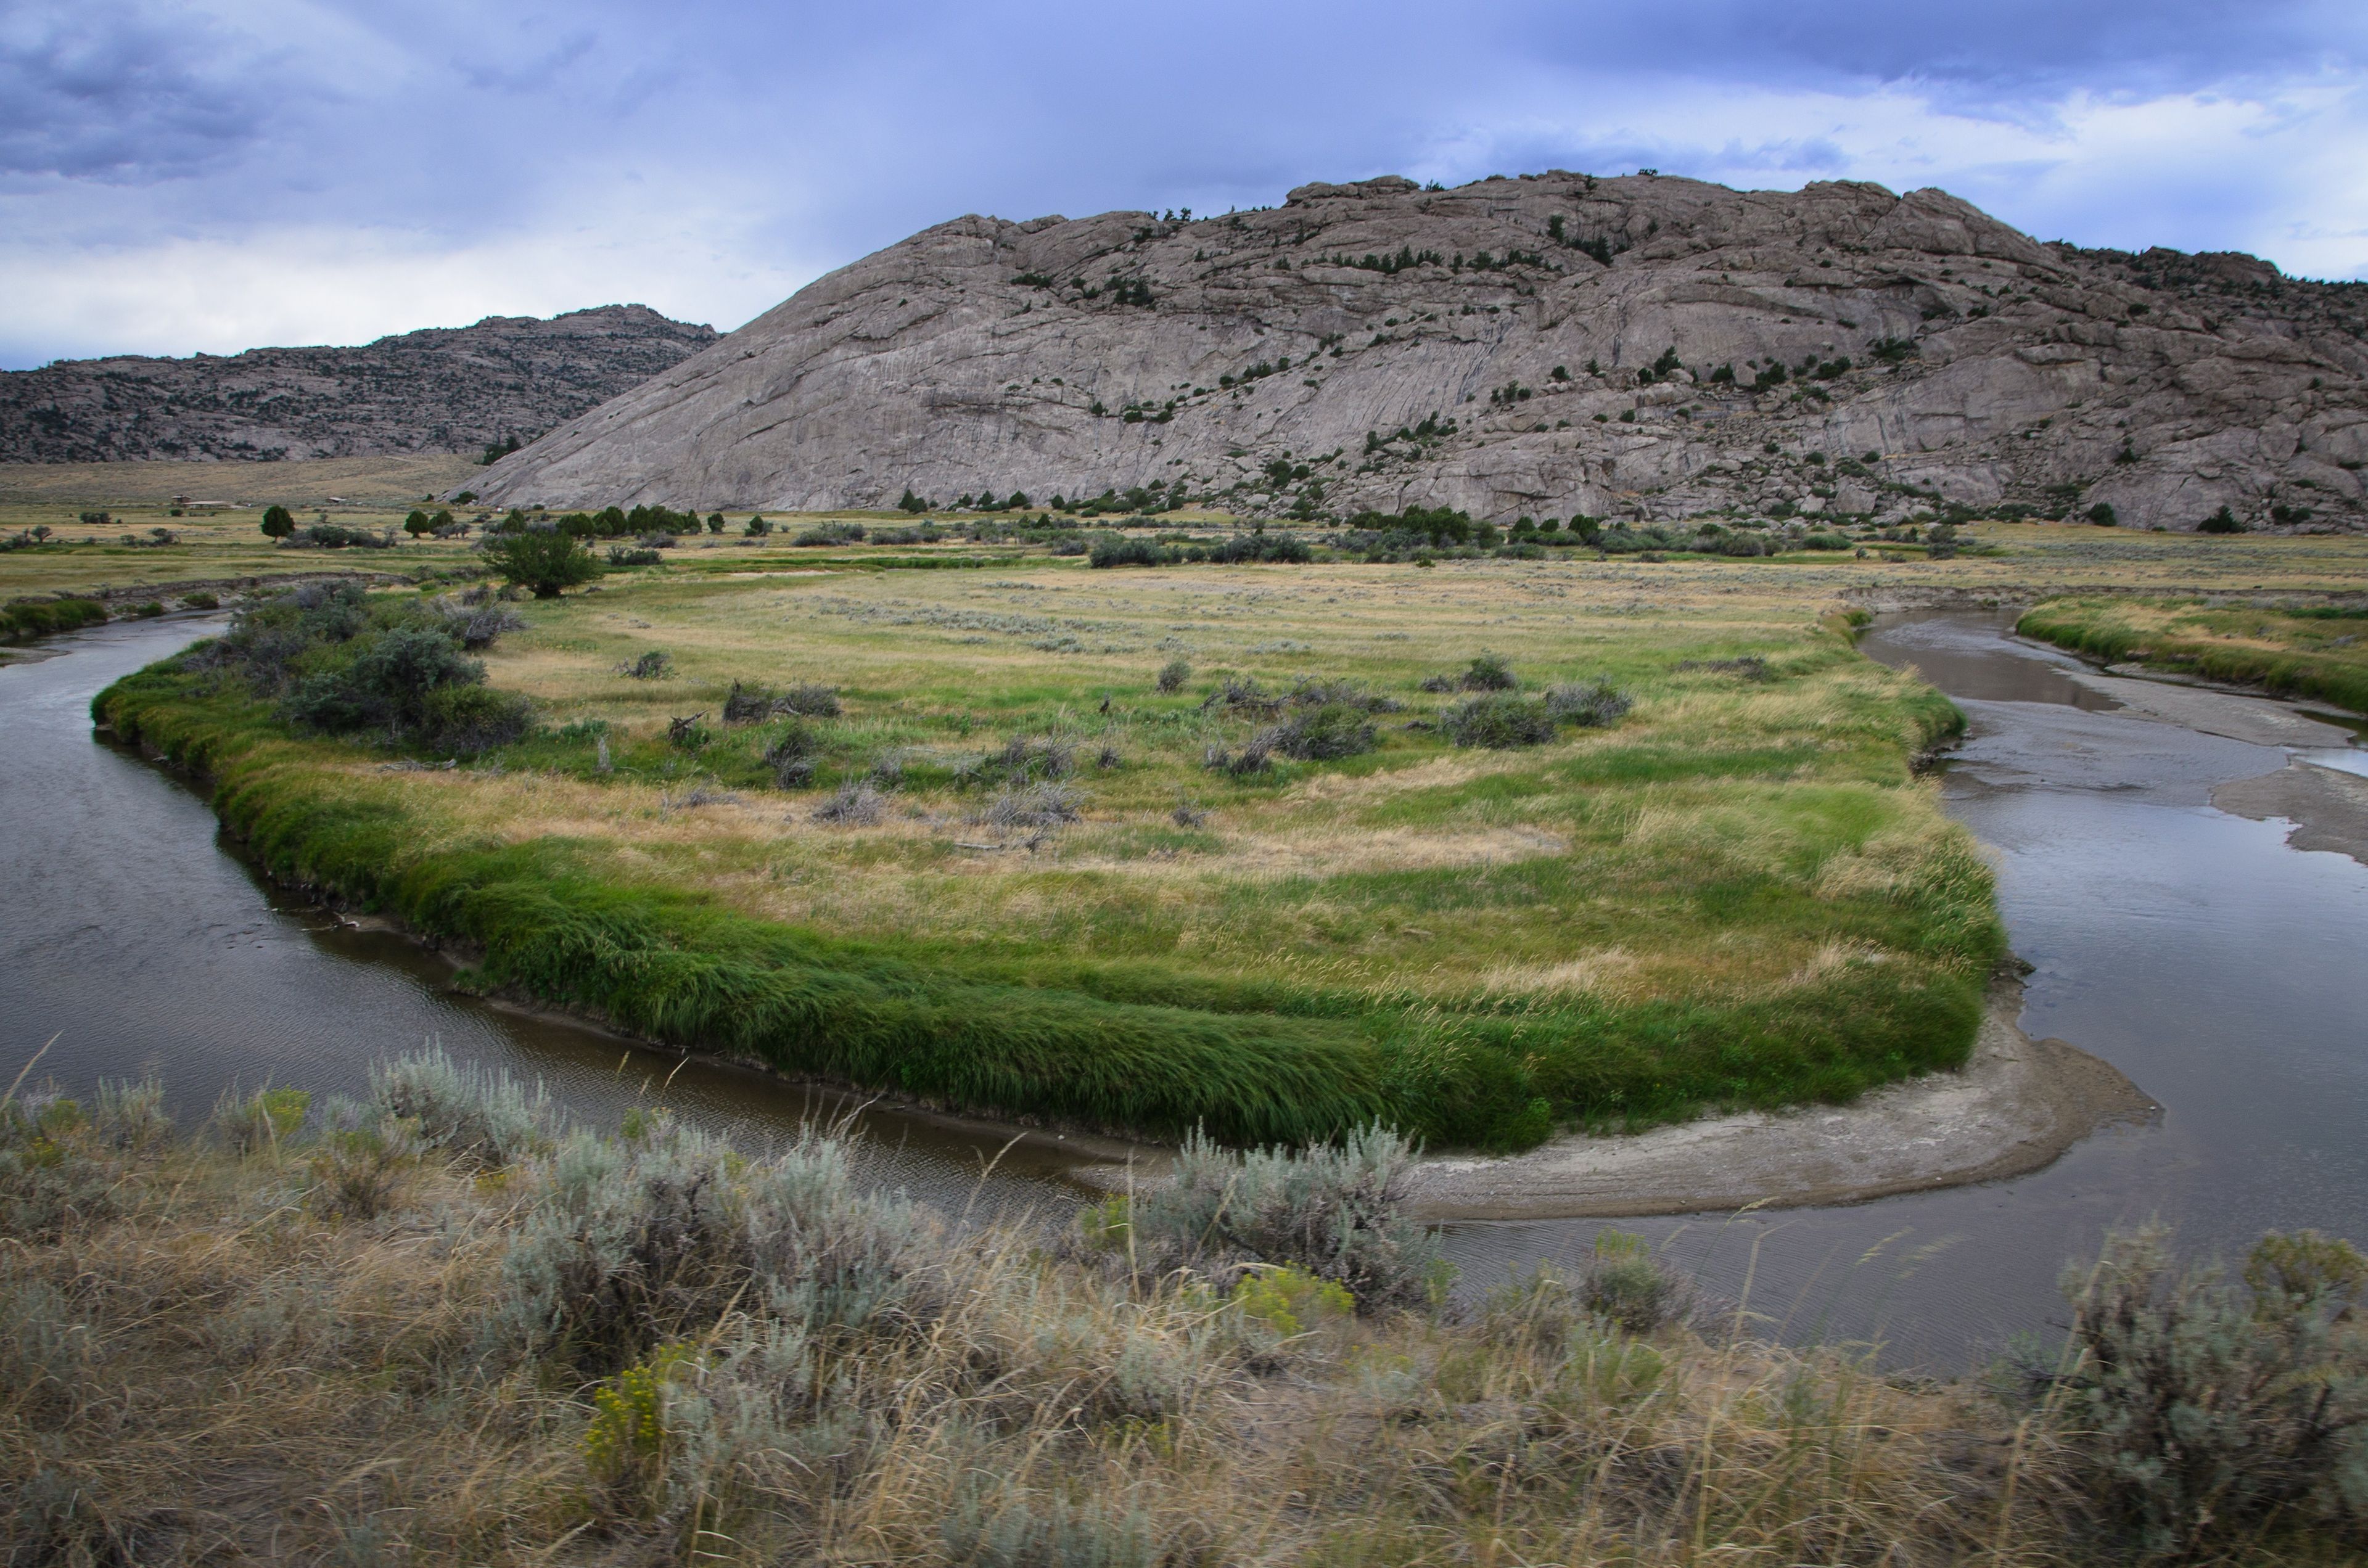 The Sweetwater River runs through Martin’s Cove in Wyoming.